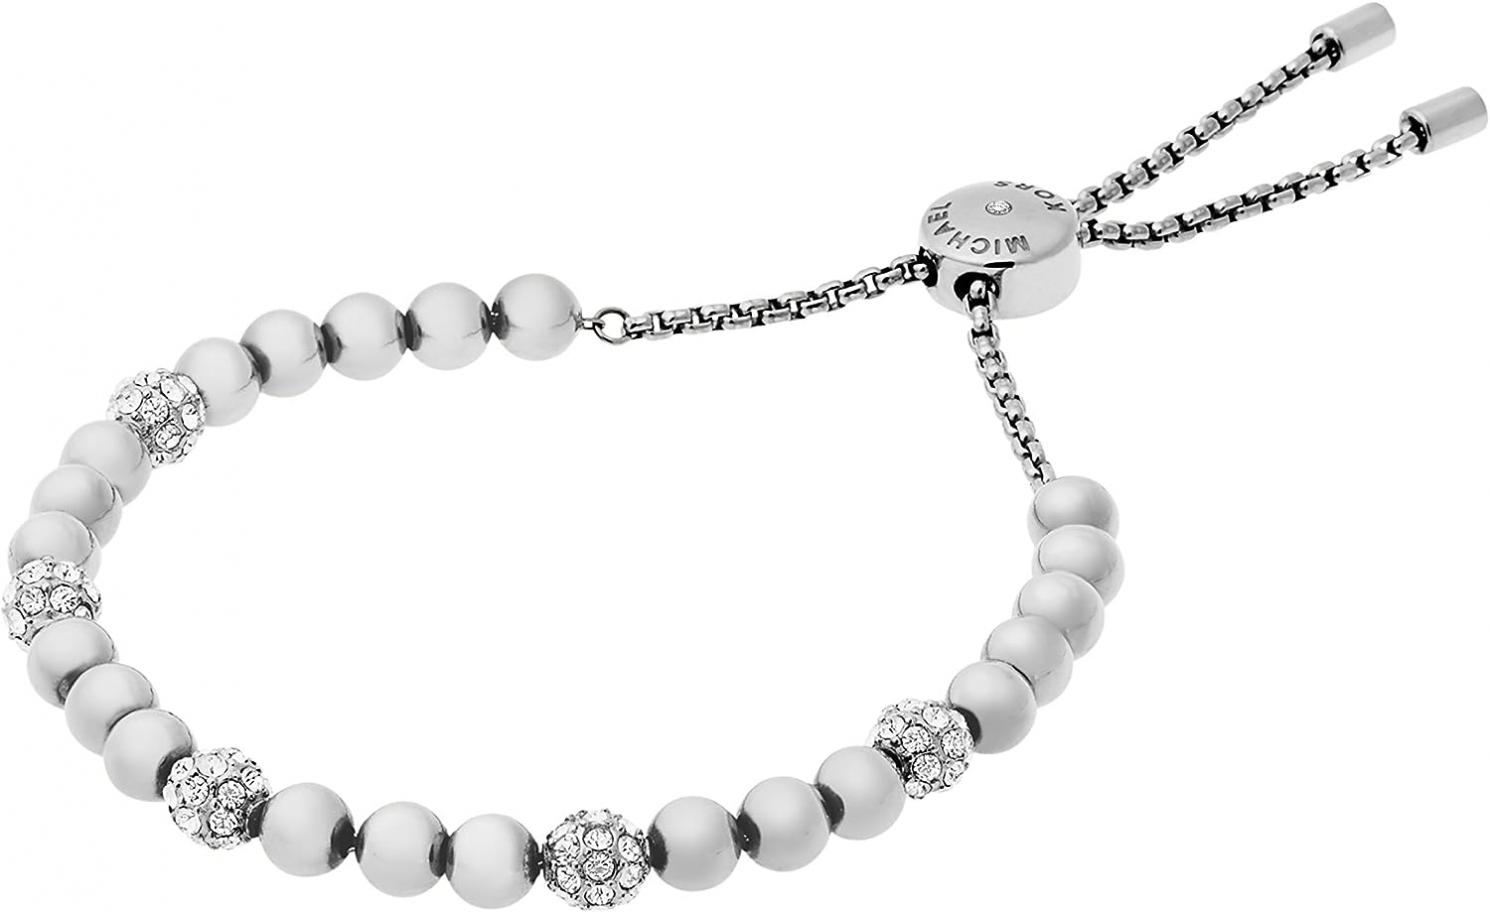 Michael Kors Women's Stainless Steel Silver-Tone Slider Bracelet with Crystal Accents